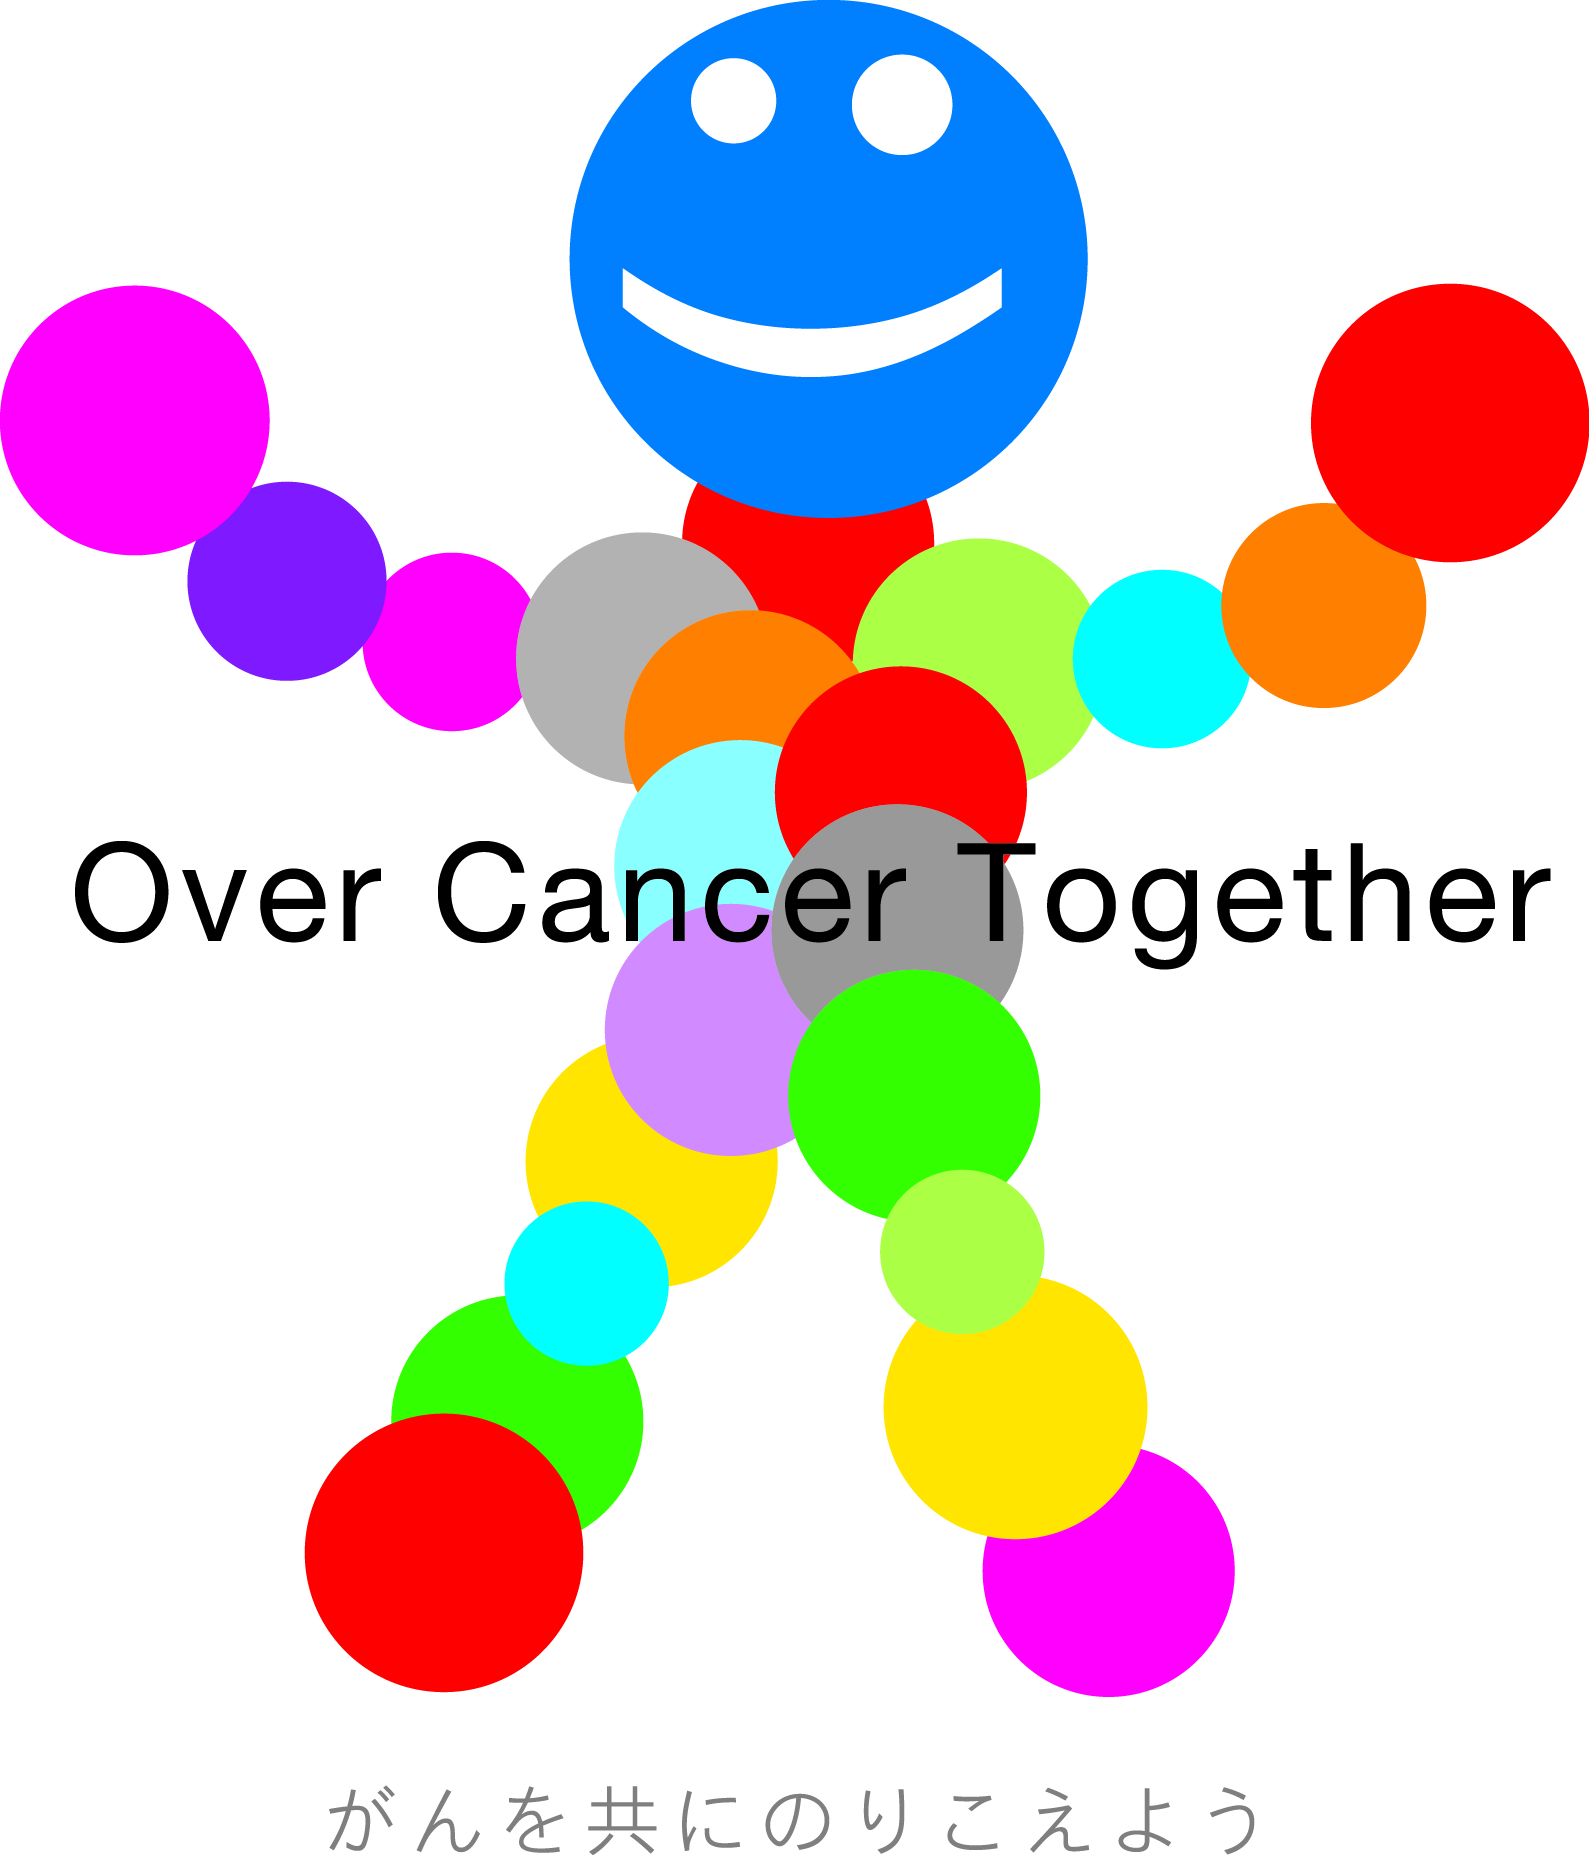 Over Cancer Together Campaign Official Website Open